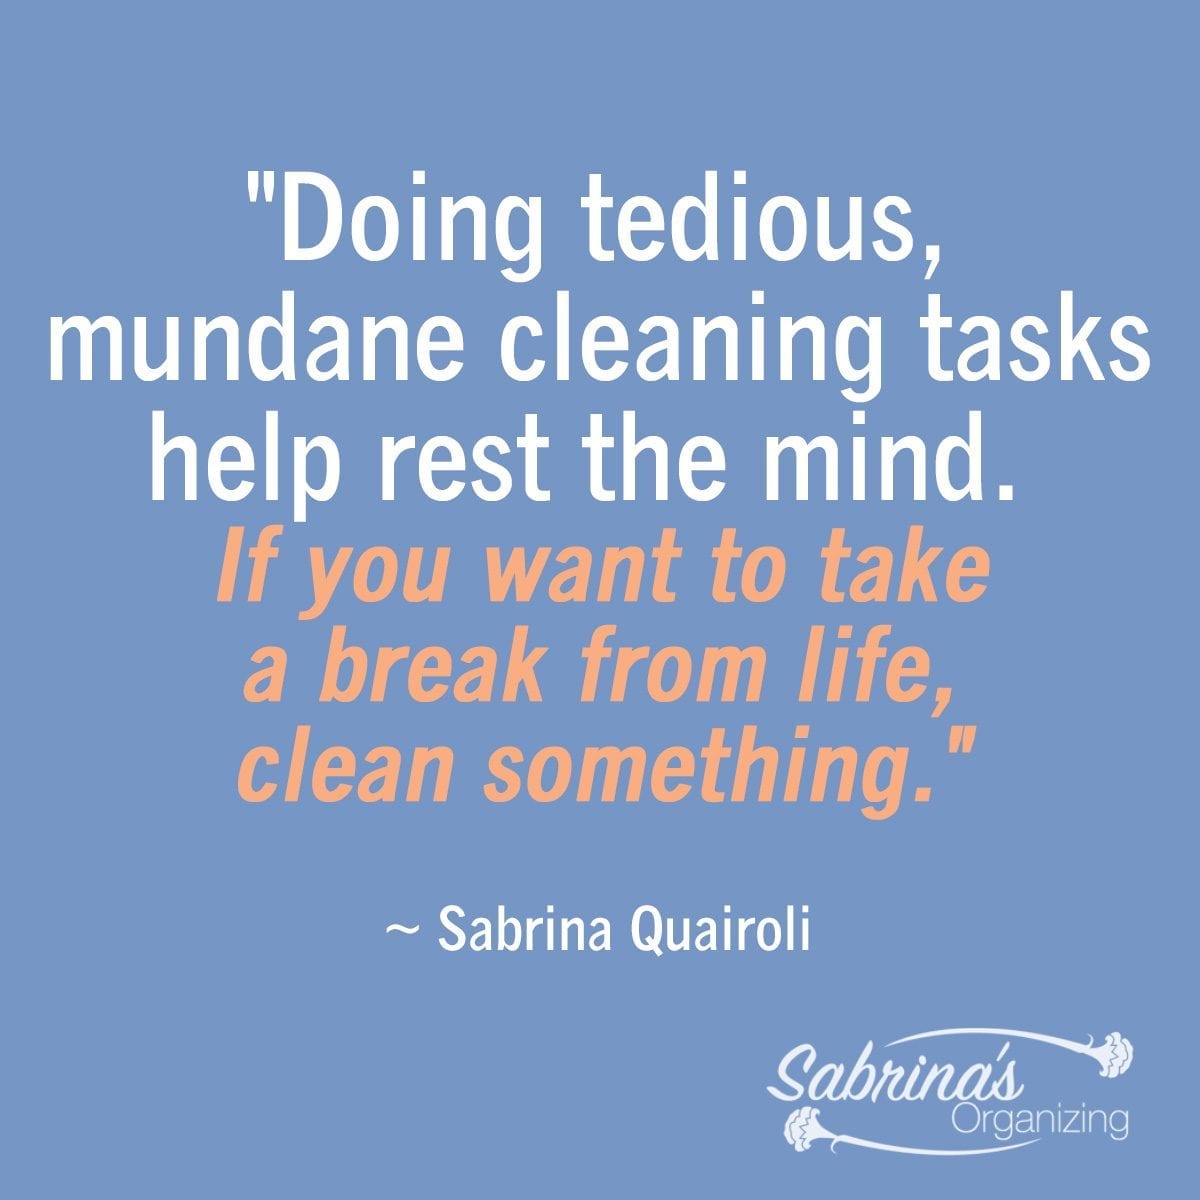 Doing tedious, mundane cleaning tasks help rest the mind. If you want to take a break from life, clean something. by Sabrina Quairoli